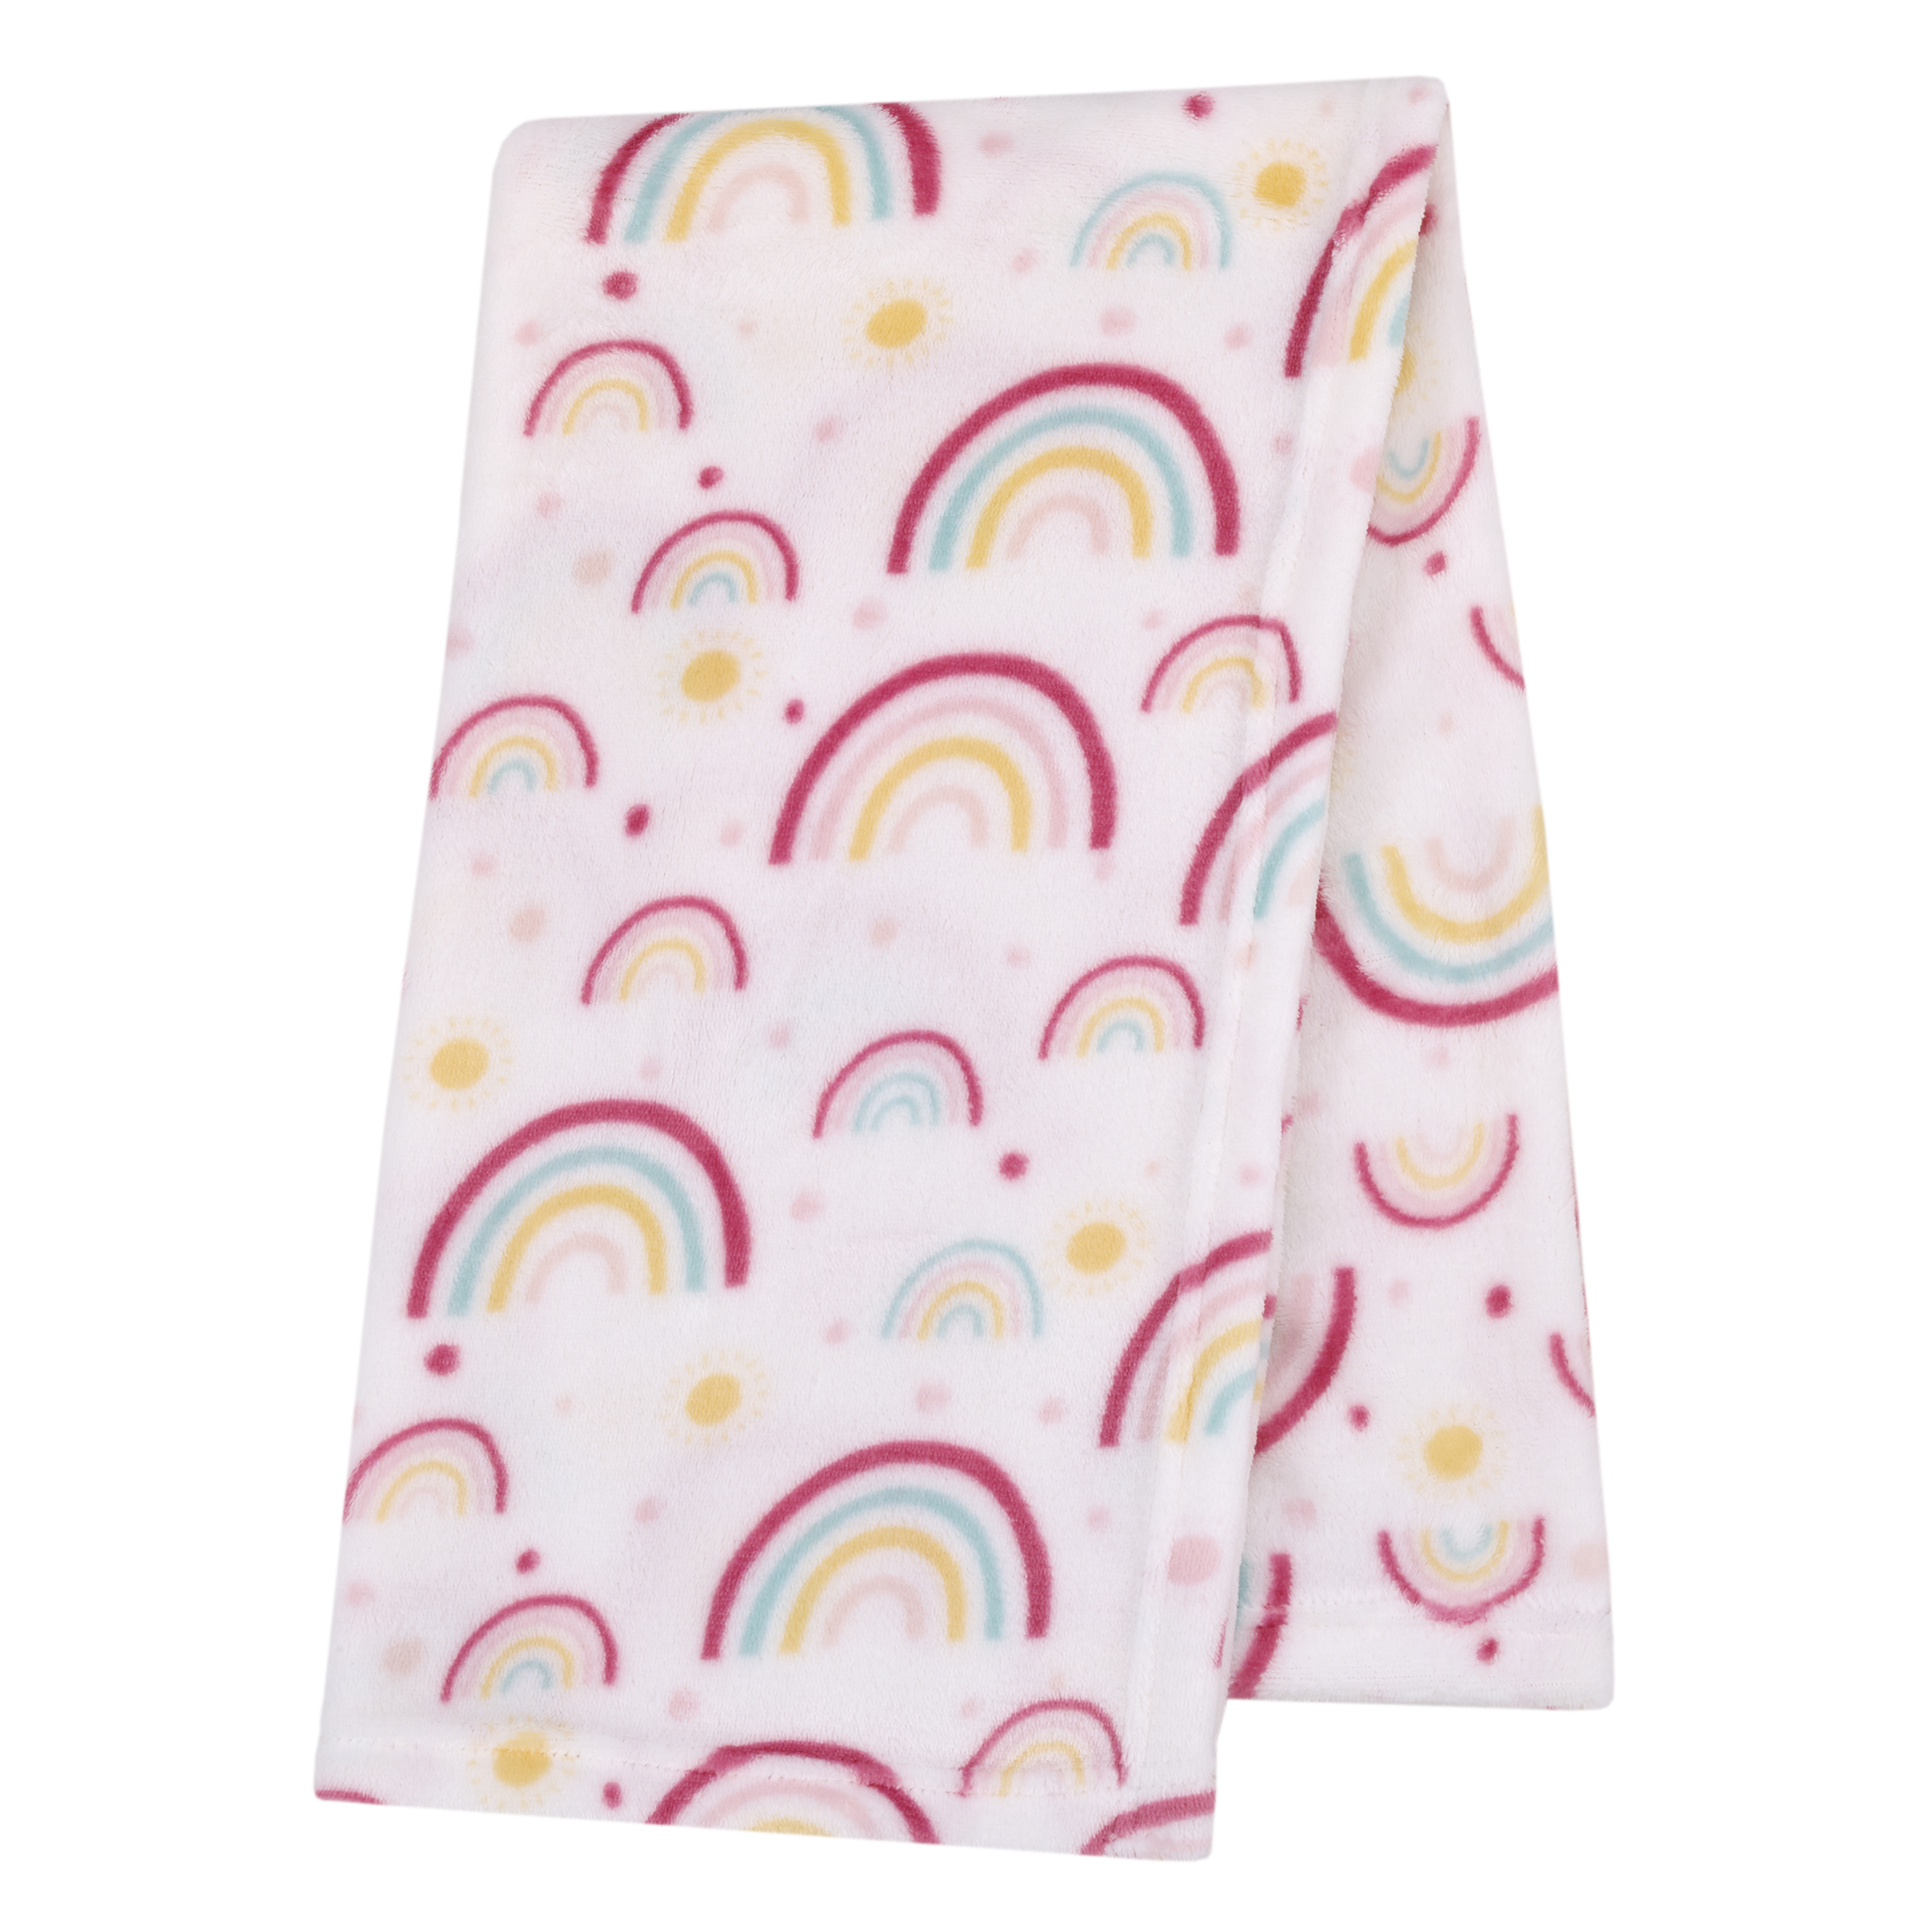 Parent's Choice Plush Baby Blanket, Rainbows, 30" x 36", Pink, Infant Girl - image 2 of 11